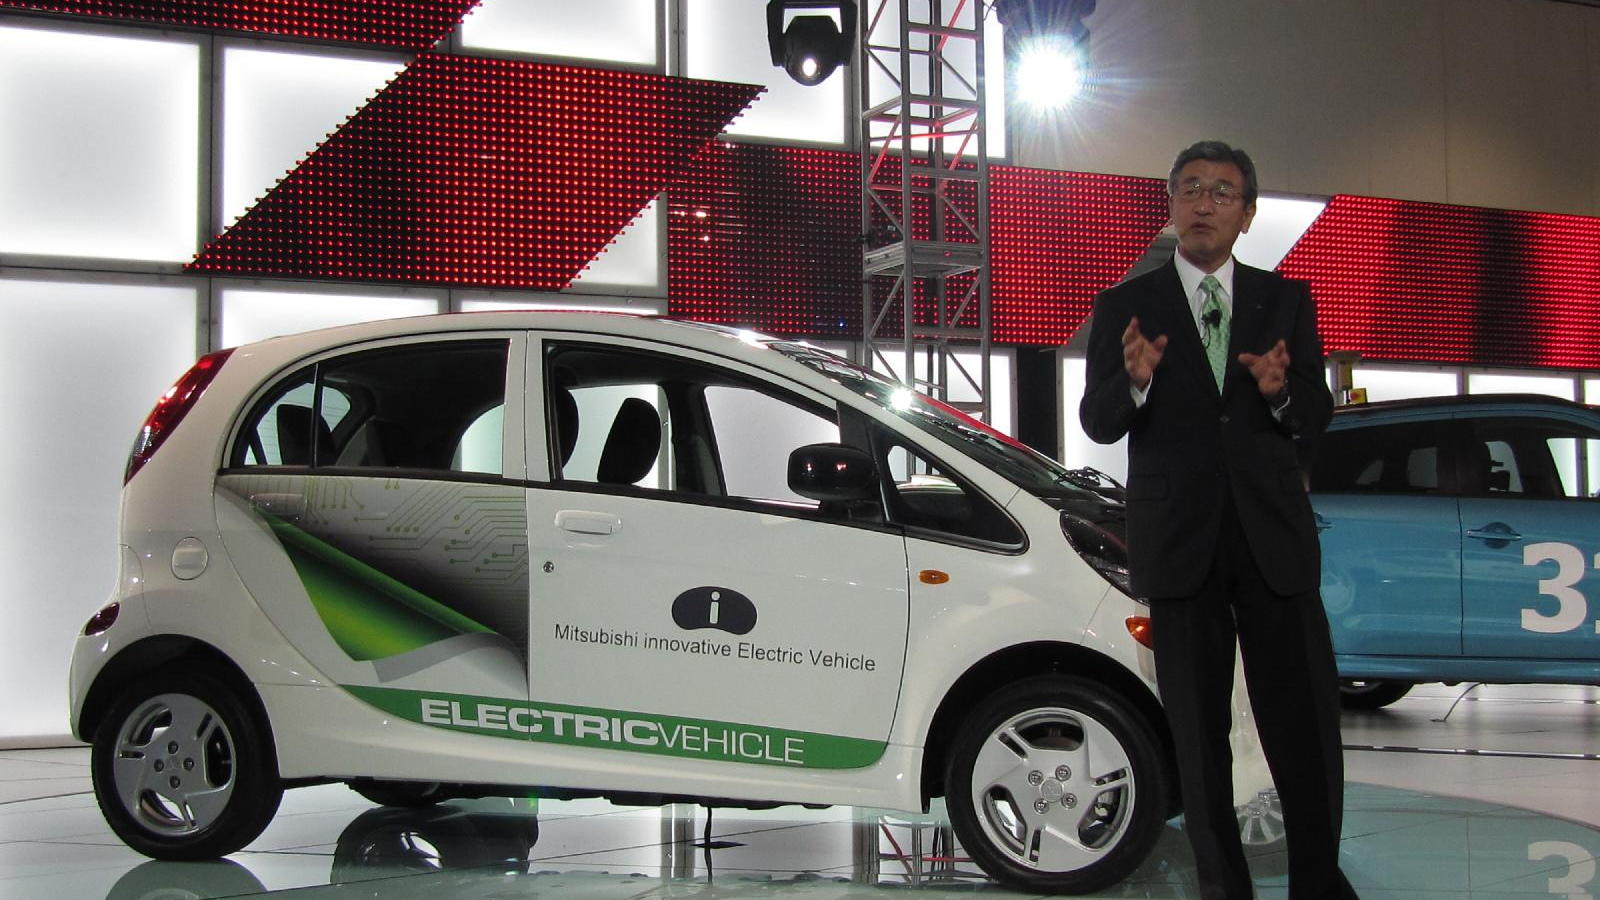 2012 Mitsubishi "i" electric car, powered by MiEV, launch event at 2010 Los Angeles Auto Show